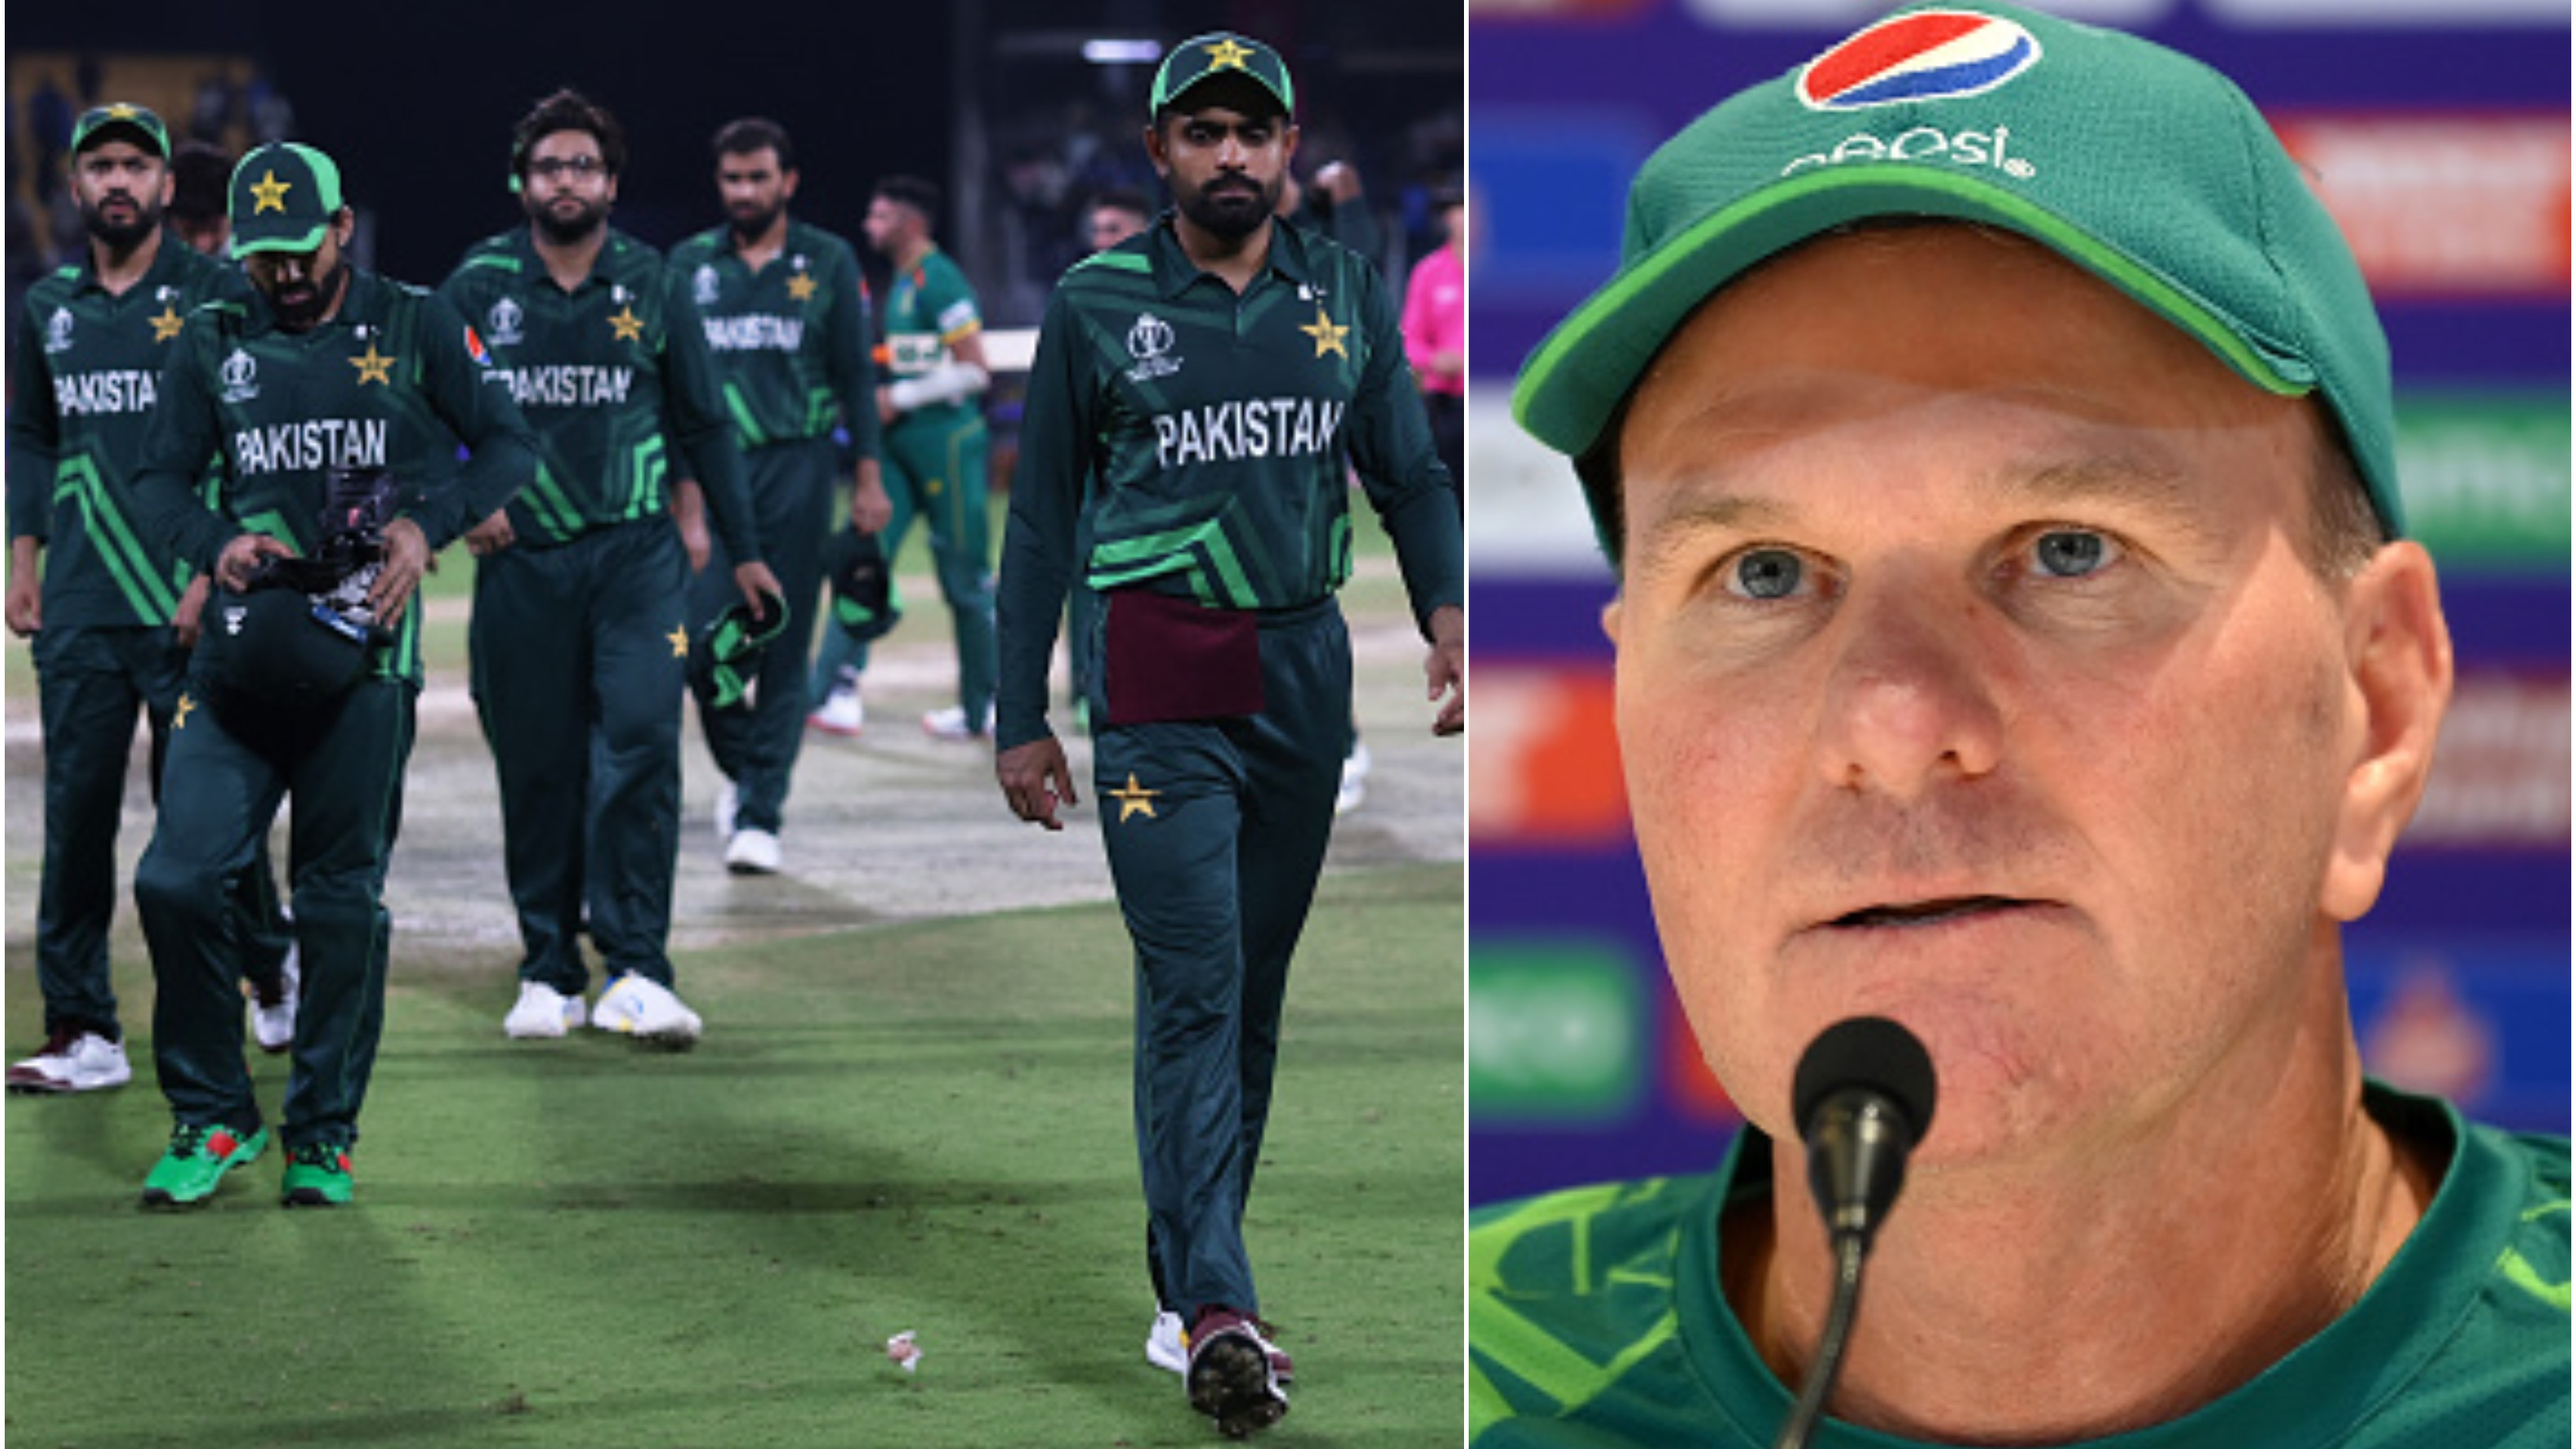 CWC 2023: “This tournament is on foreign conditions for us,” Pakistan head coach on team’s poor show in World Cup